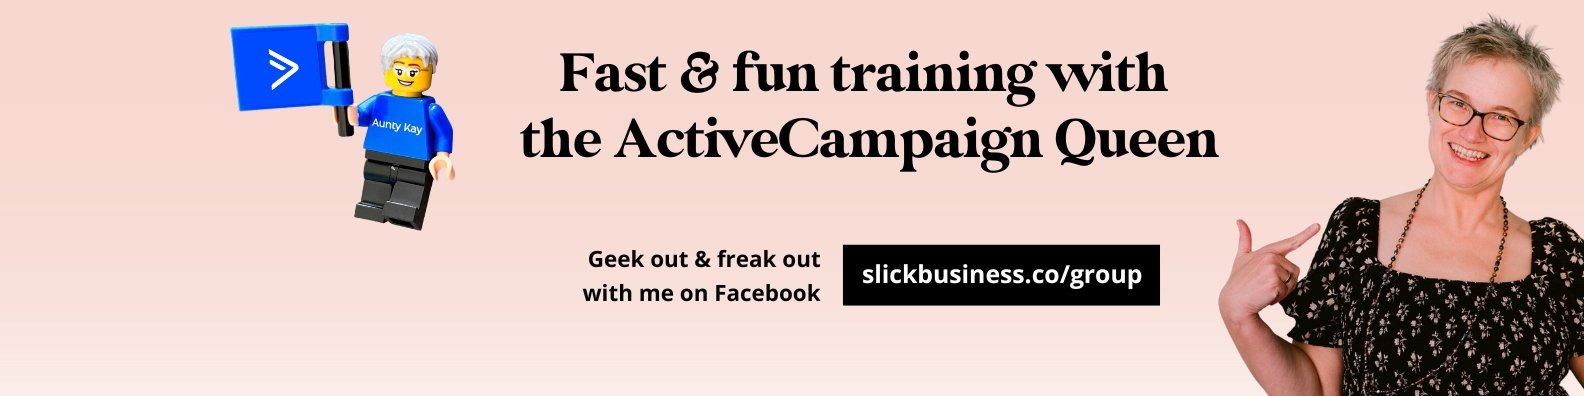 Slick Business - ActiveCampaign Academy with Kay Peacey